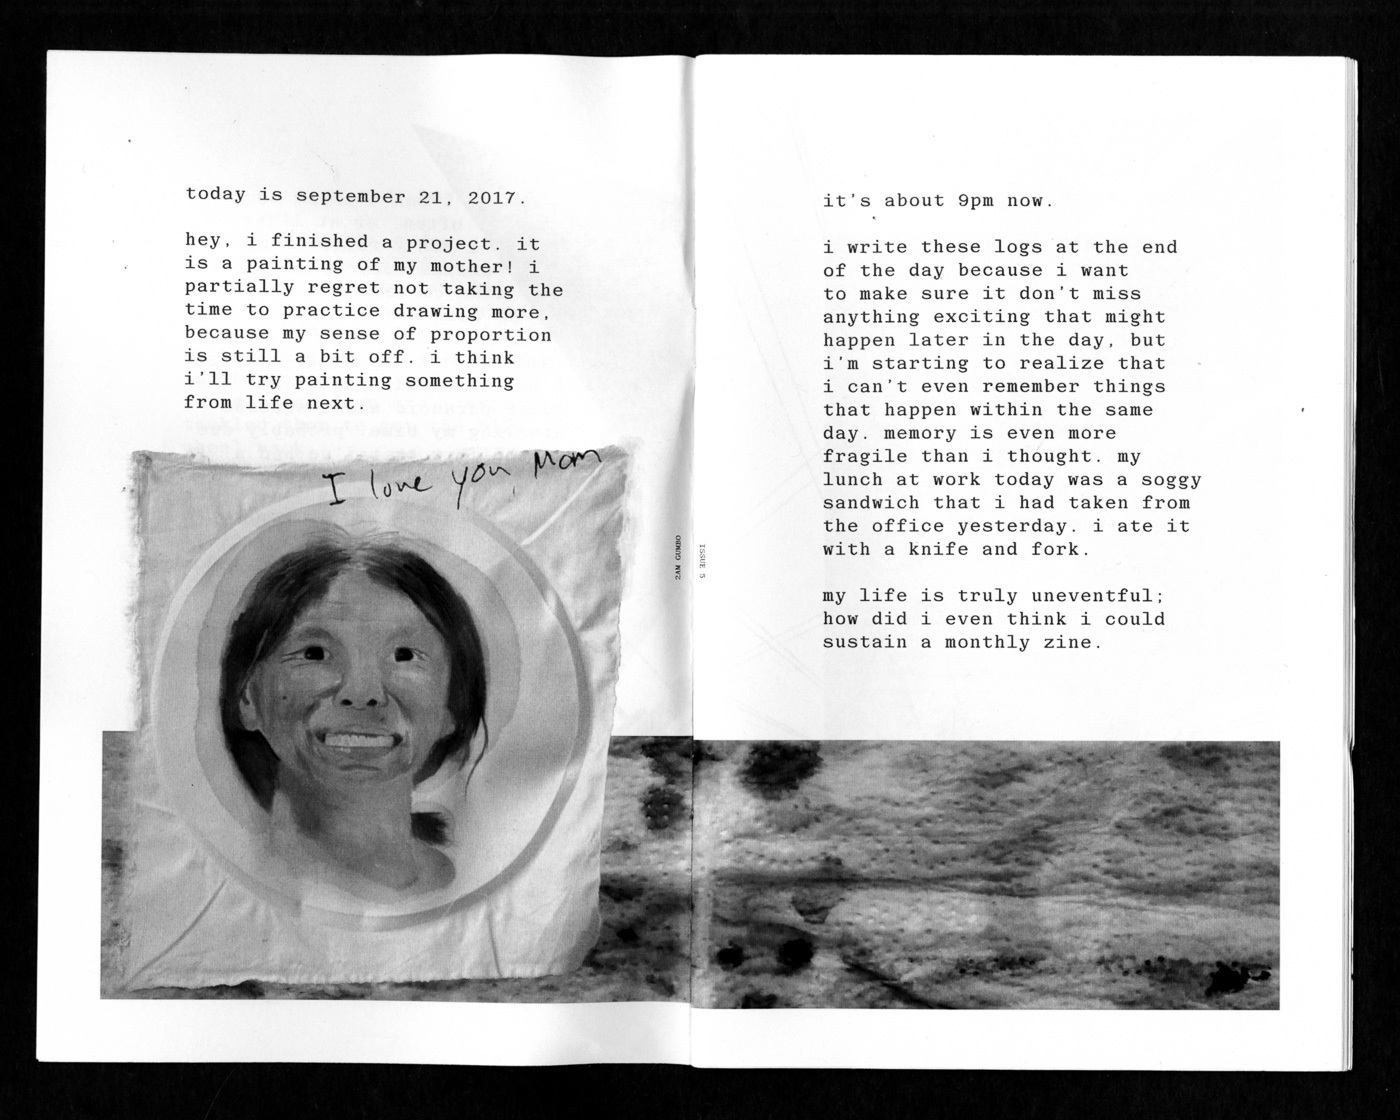 an interior spread from the zine 2A.M. Gumbo. there is a painting of the artist's mother with the words "I love you mom"